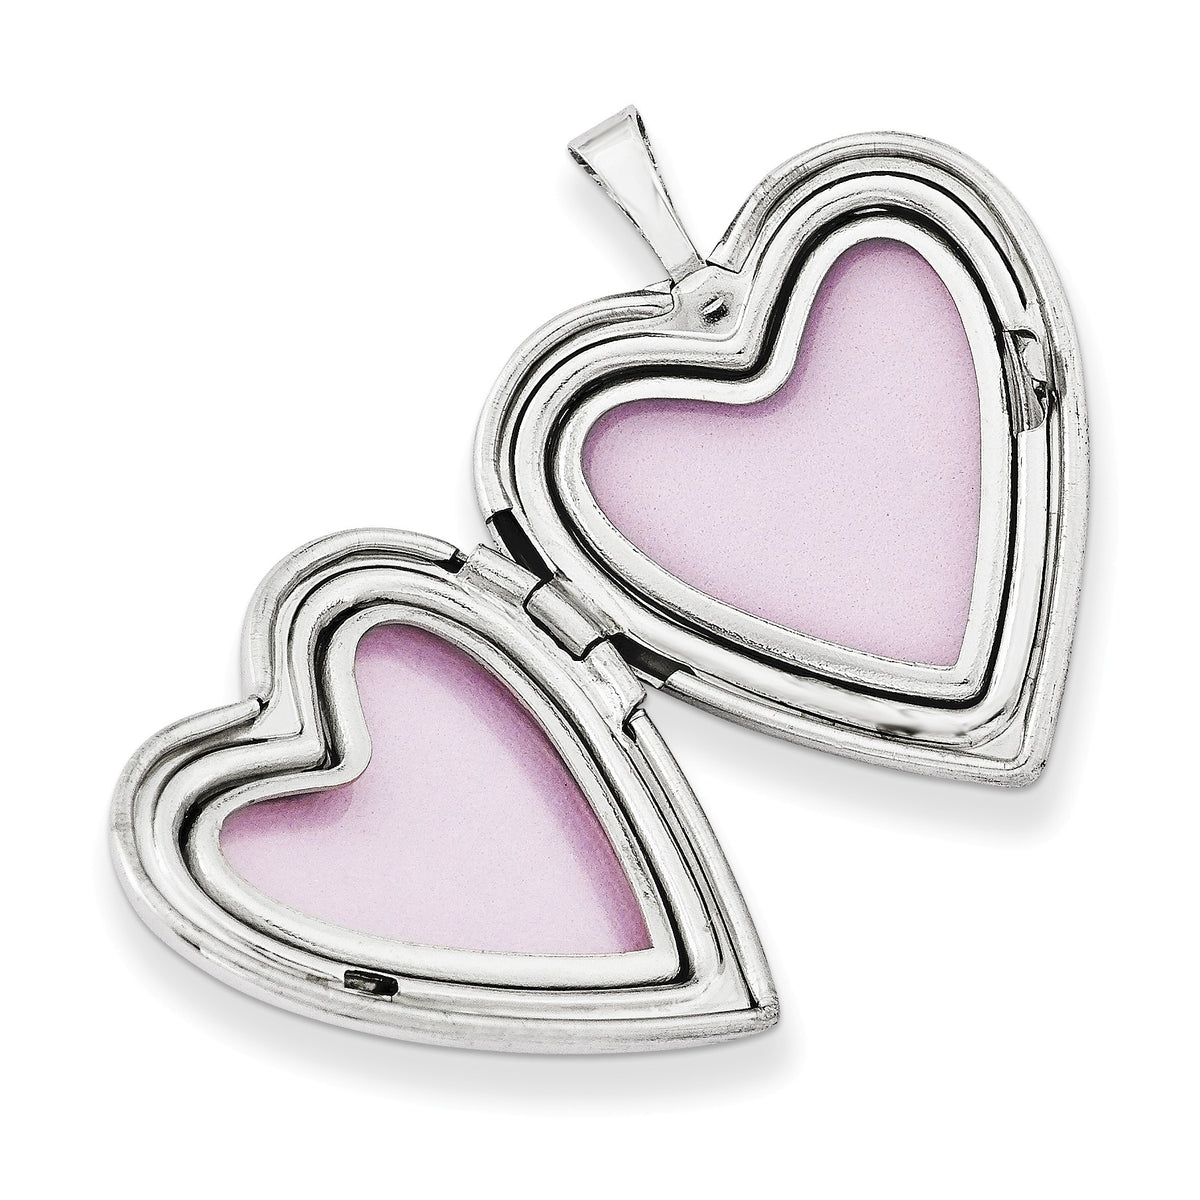 Alternate view of the Sterling Silver 20mm Polished Heart Locket by The Black Bow Jewelry Co.